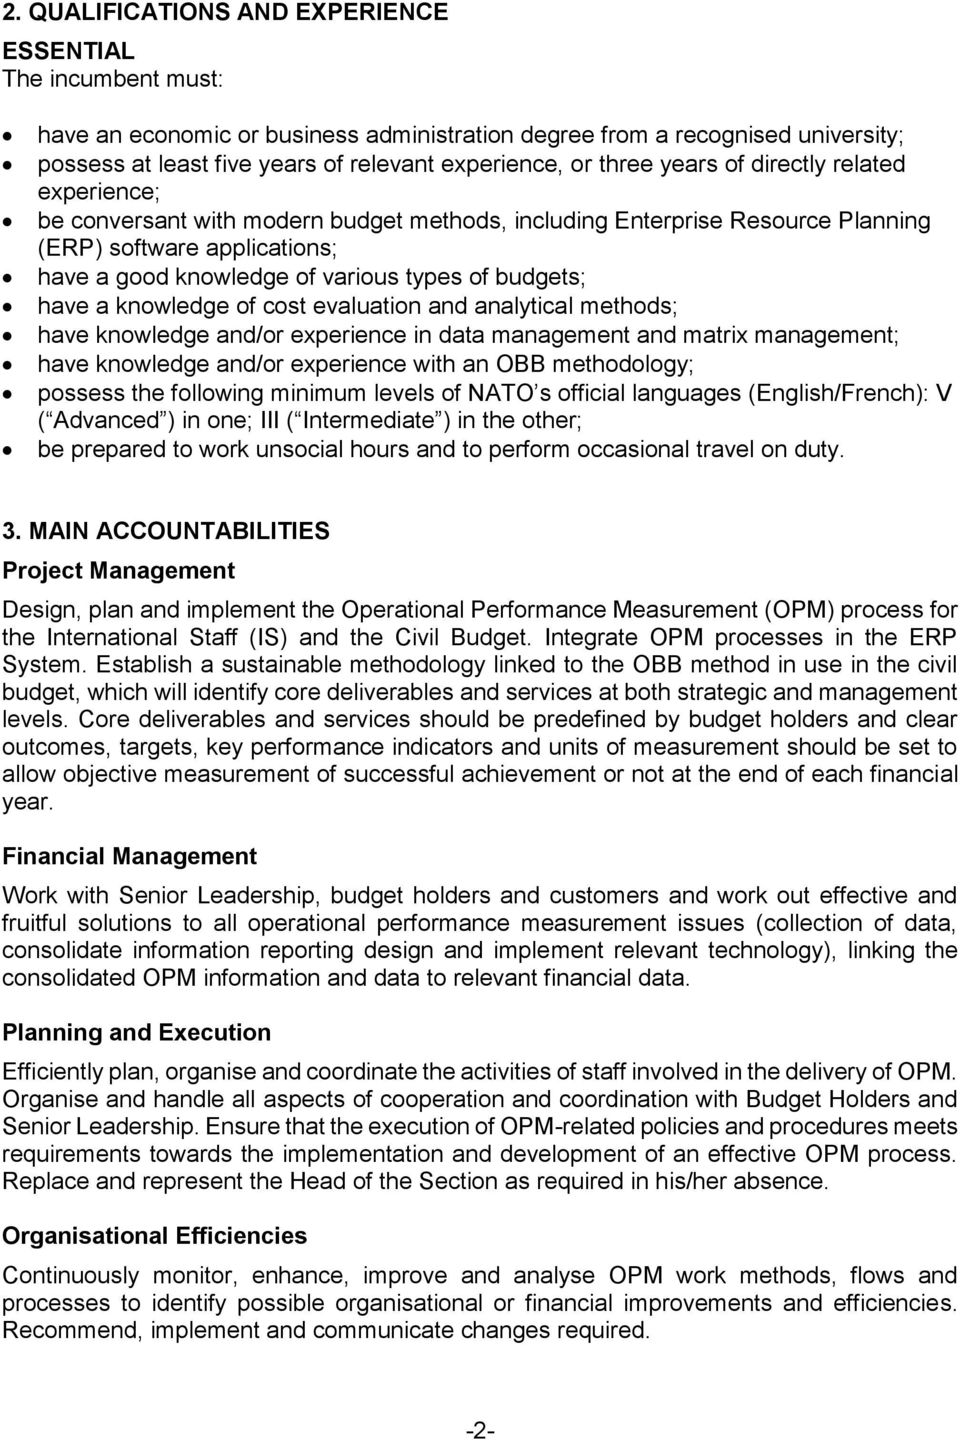 budgets; have a knowledge of cost evaluation and analytical methods; have knowledge and/or experience in data management and matrix management; have knowledge and/or experience with an OBB